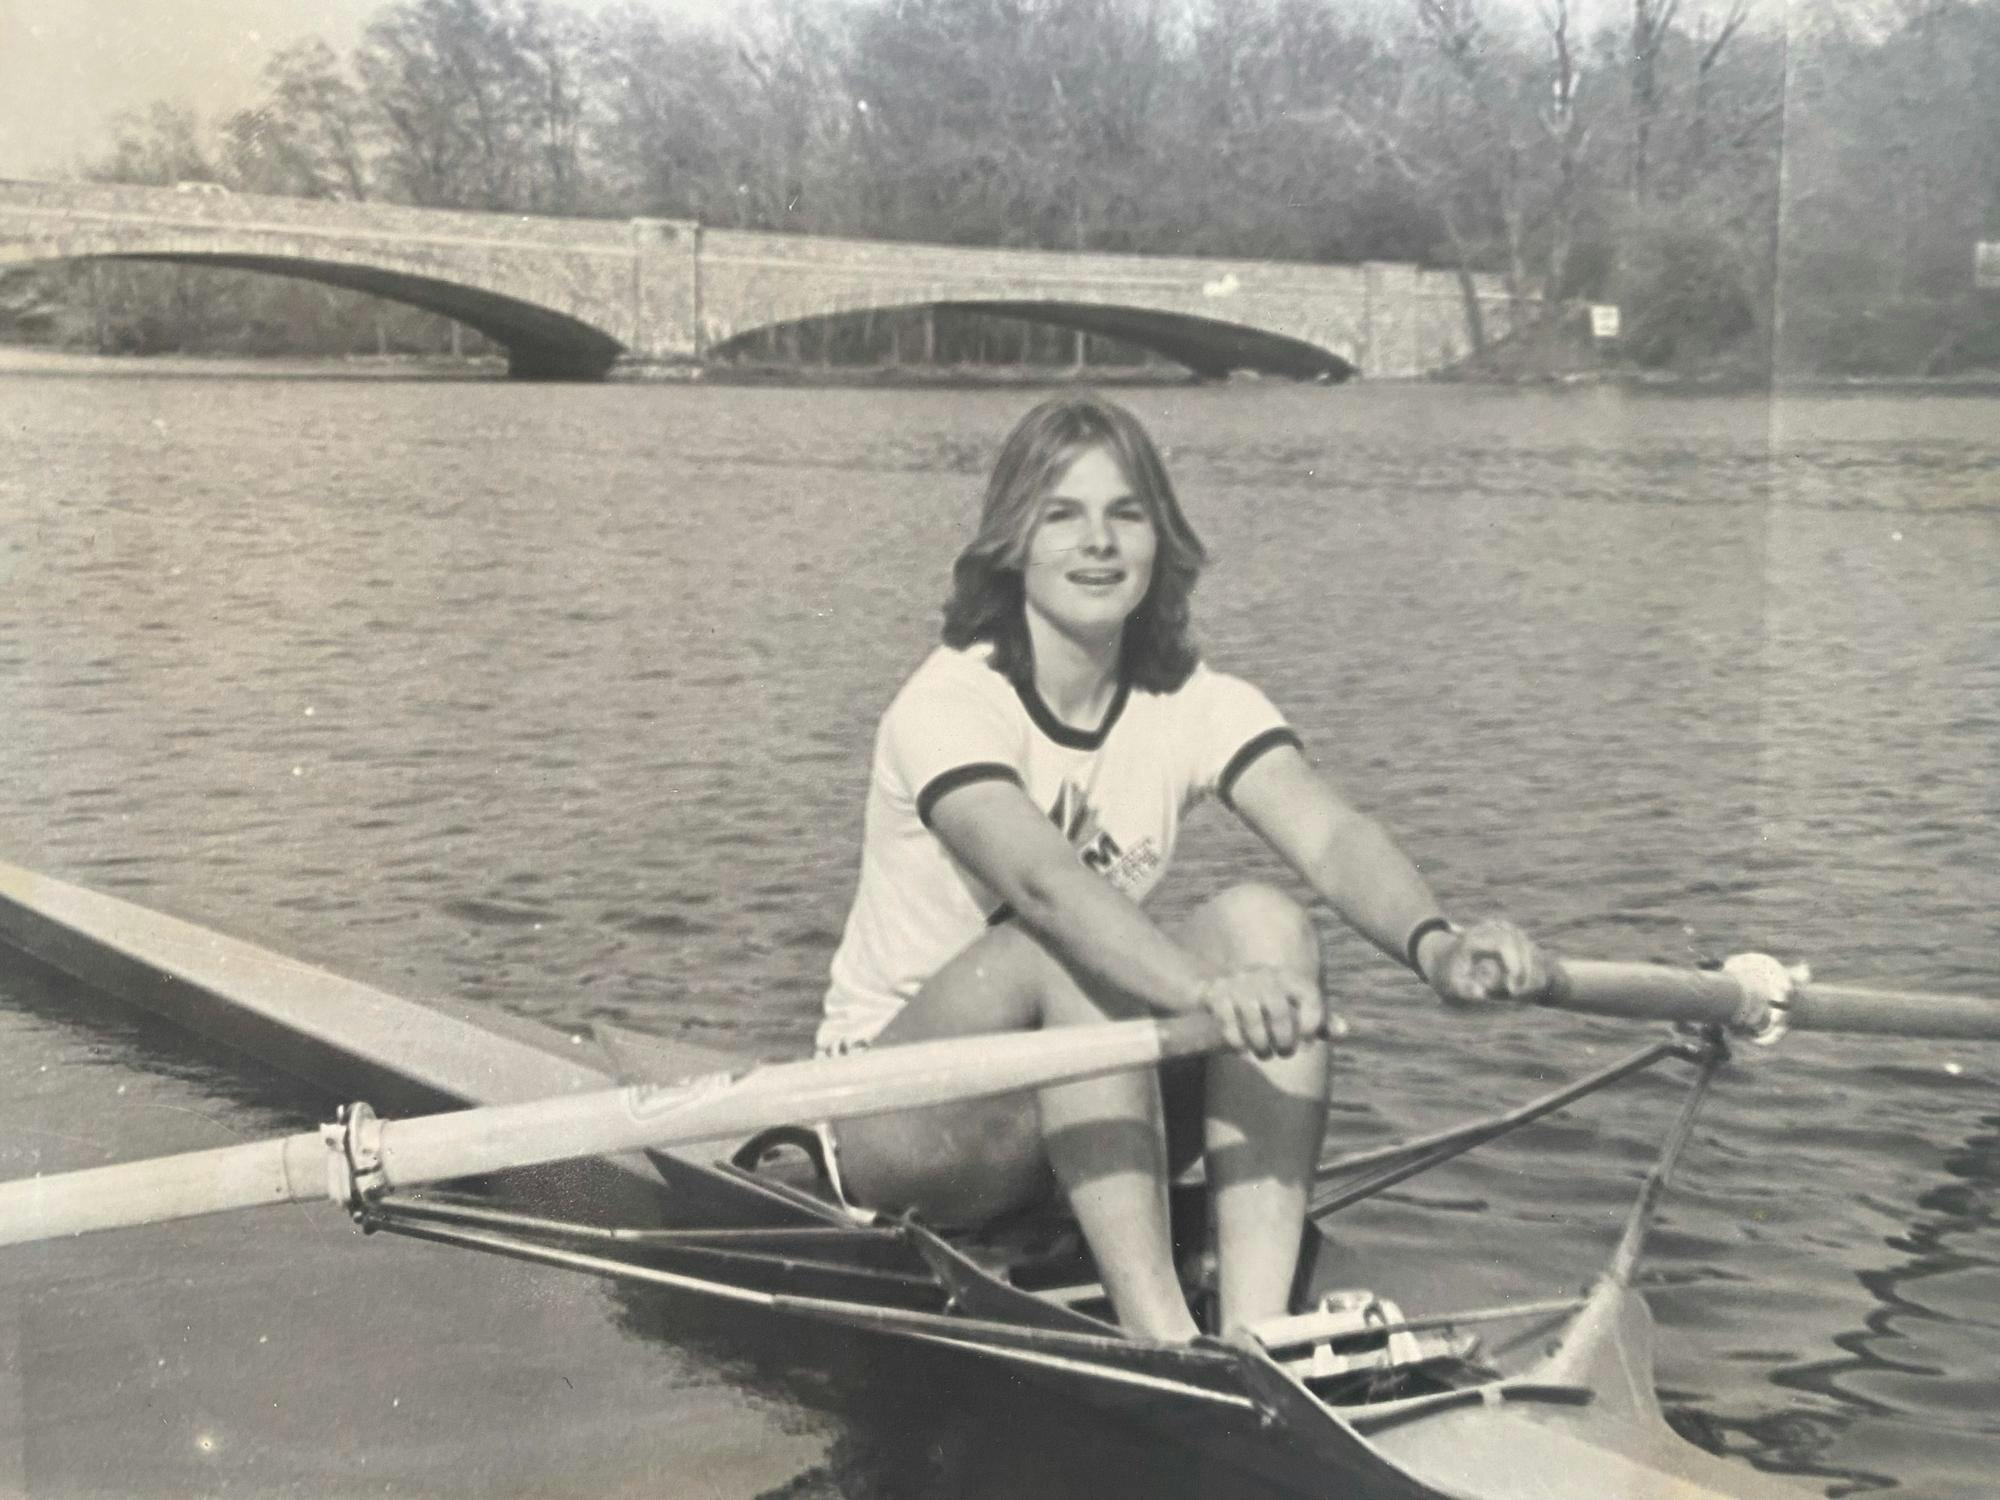 A woman sits in a boat in Lake Carnegie. There is water around her and a bridge in the background. The photo is black and white.